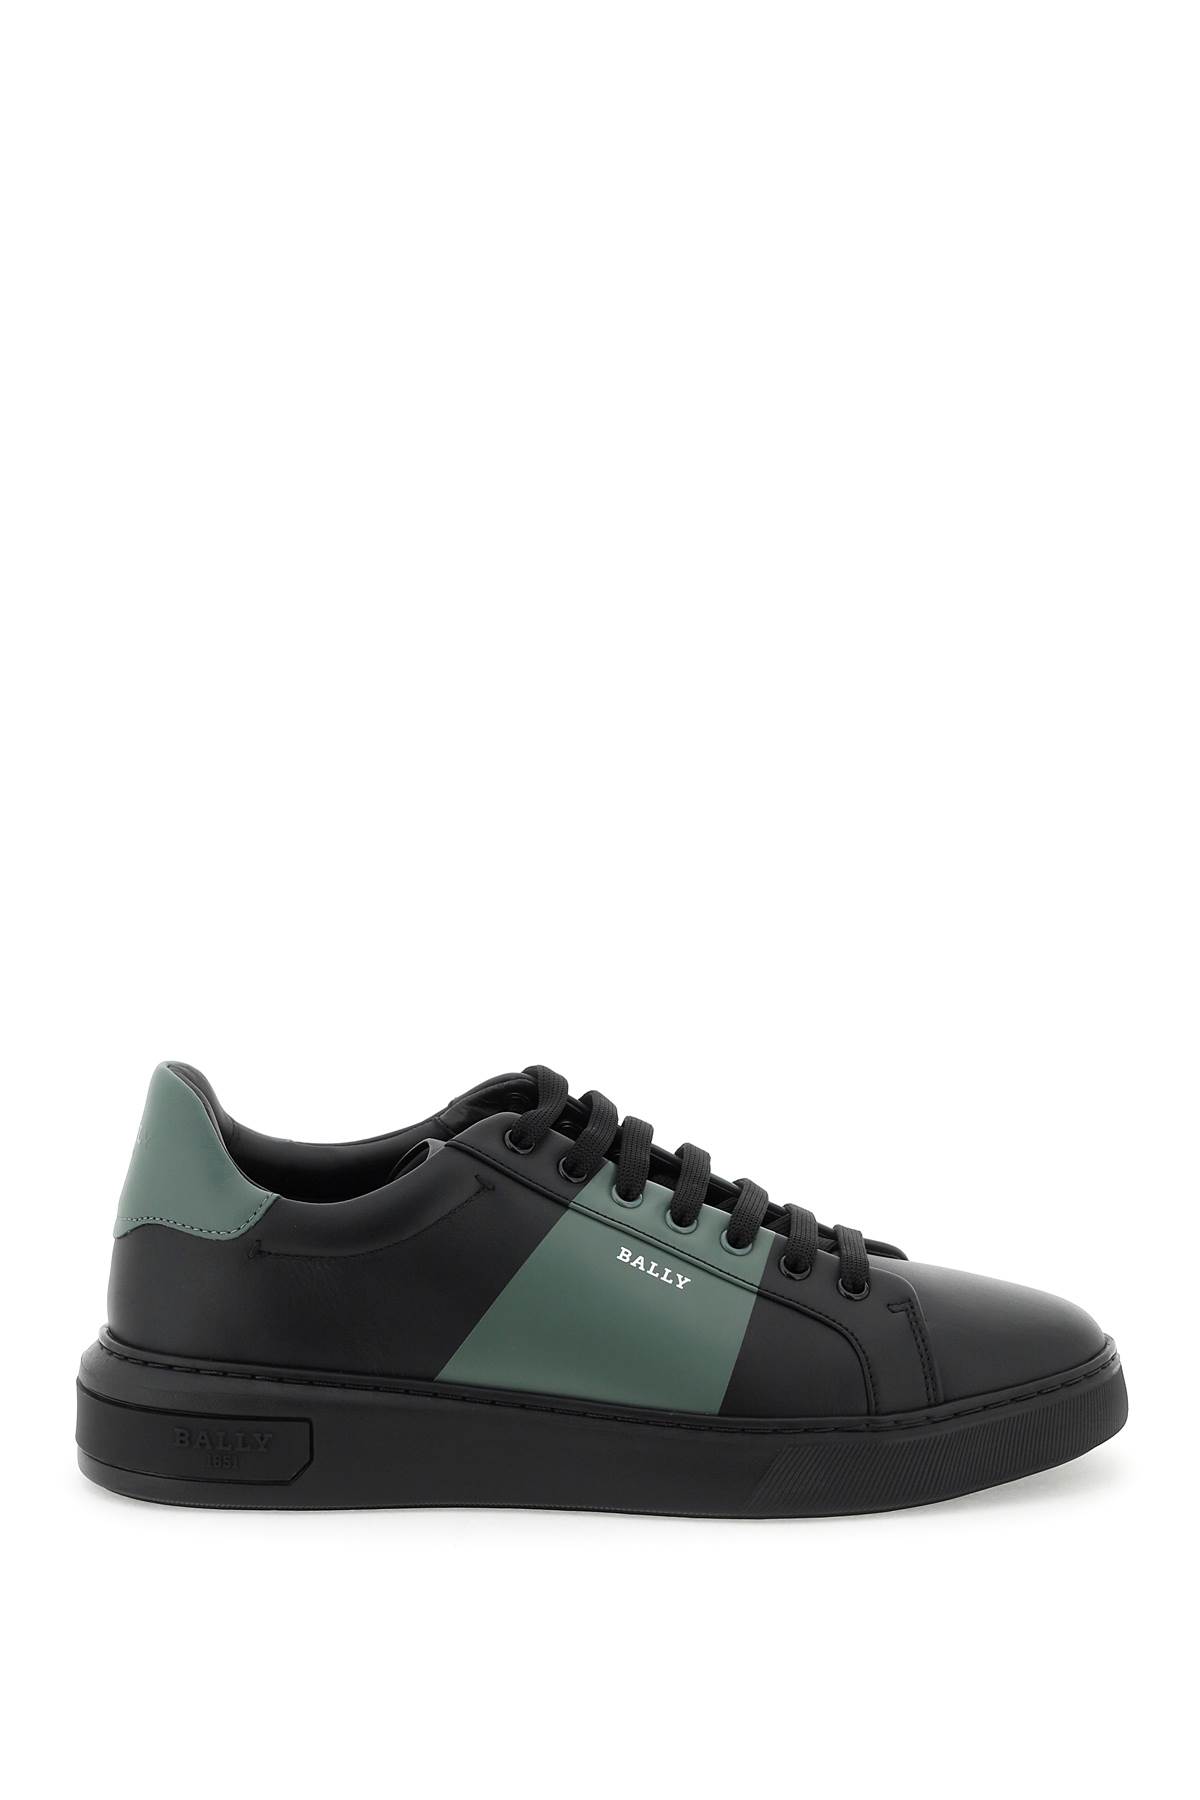 Bally mitty Sneakers